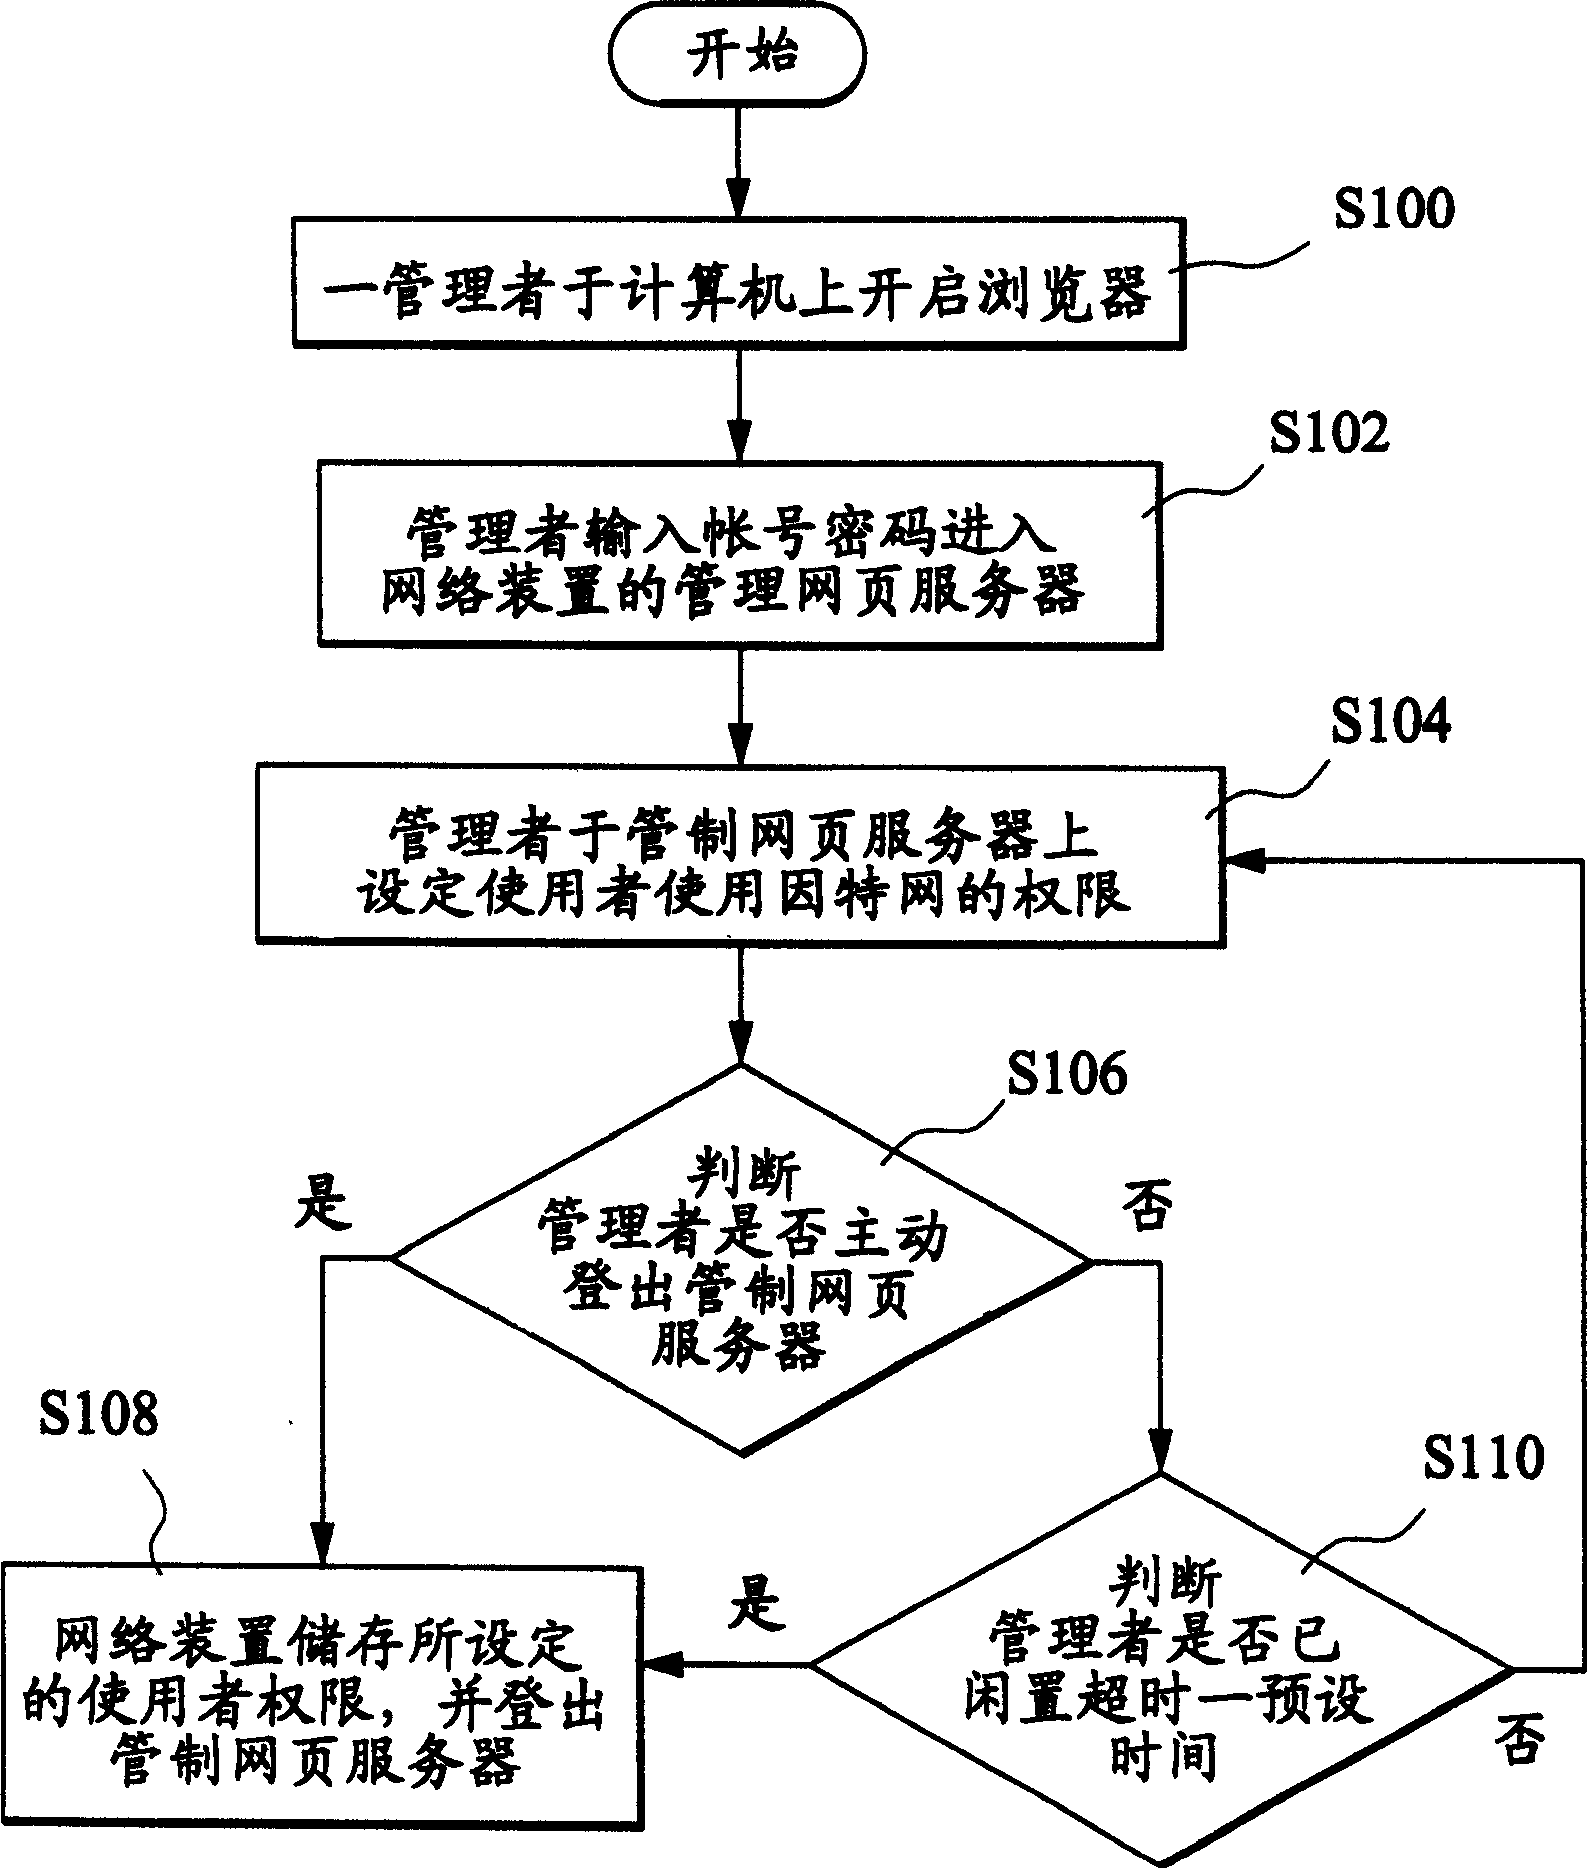 Network management and device thereof